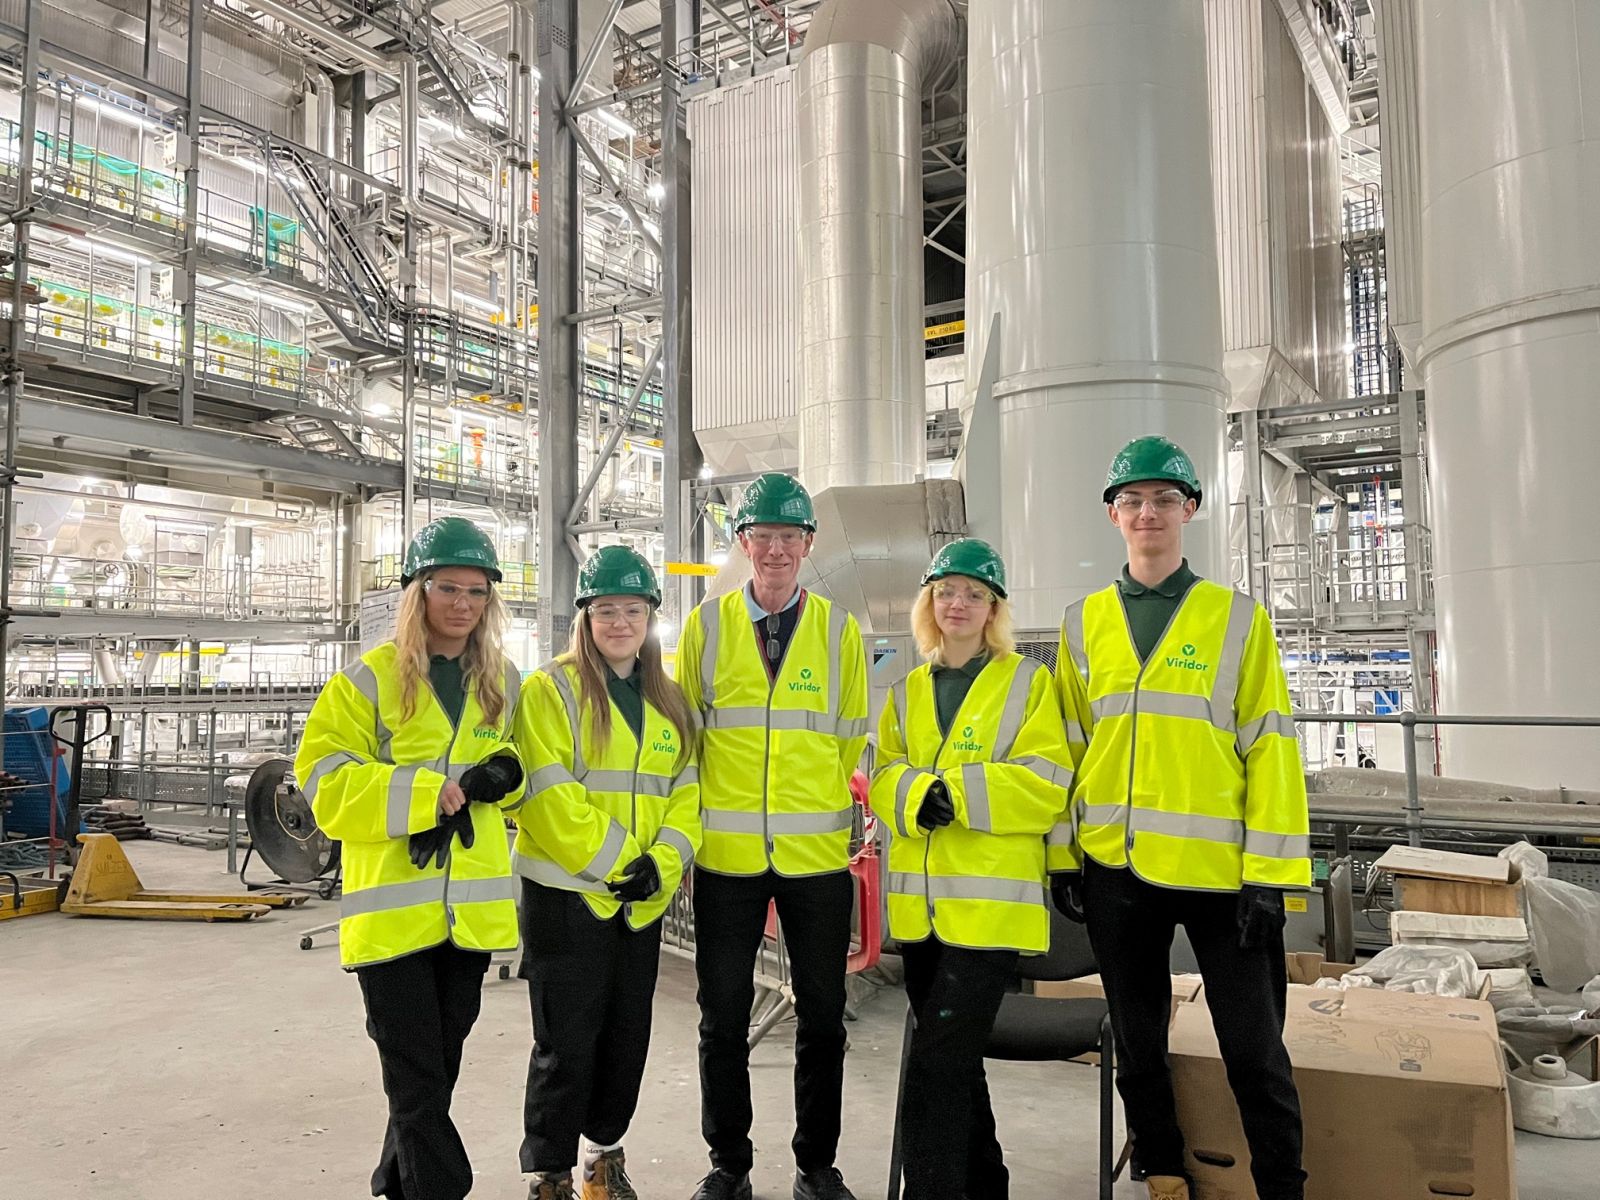 Engineering students at the Beddington Site